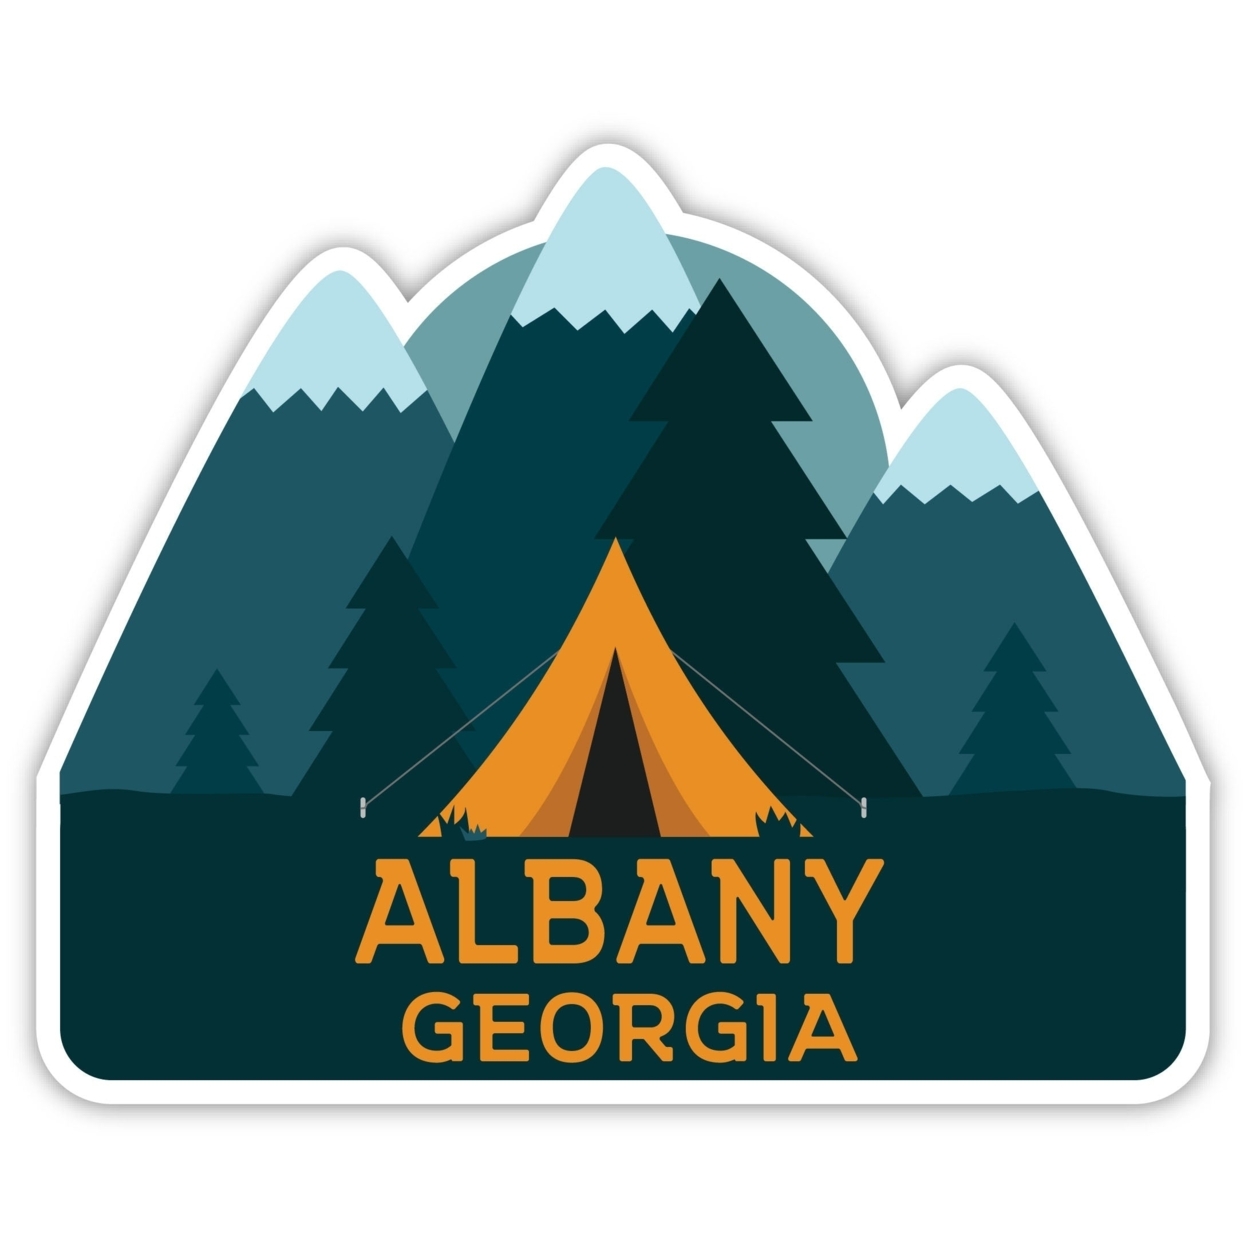 Albany Georgia Souvenir Decorative Stickers (Choose Theme And Size) - 4-Pack, 4-Inch, Tent